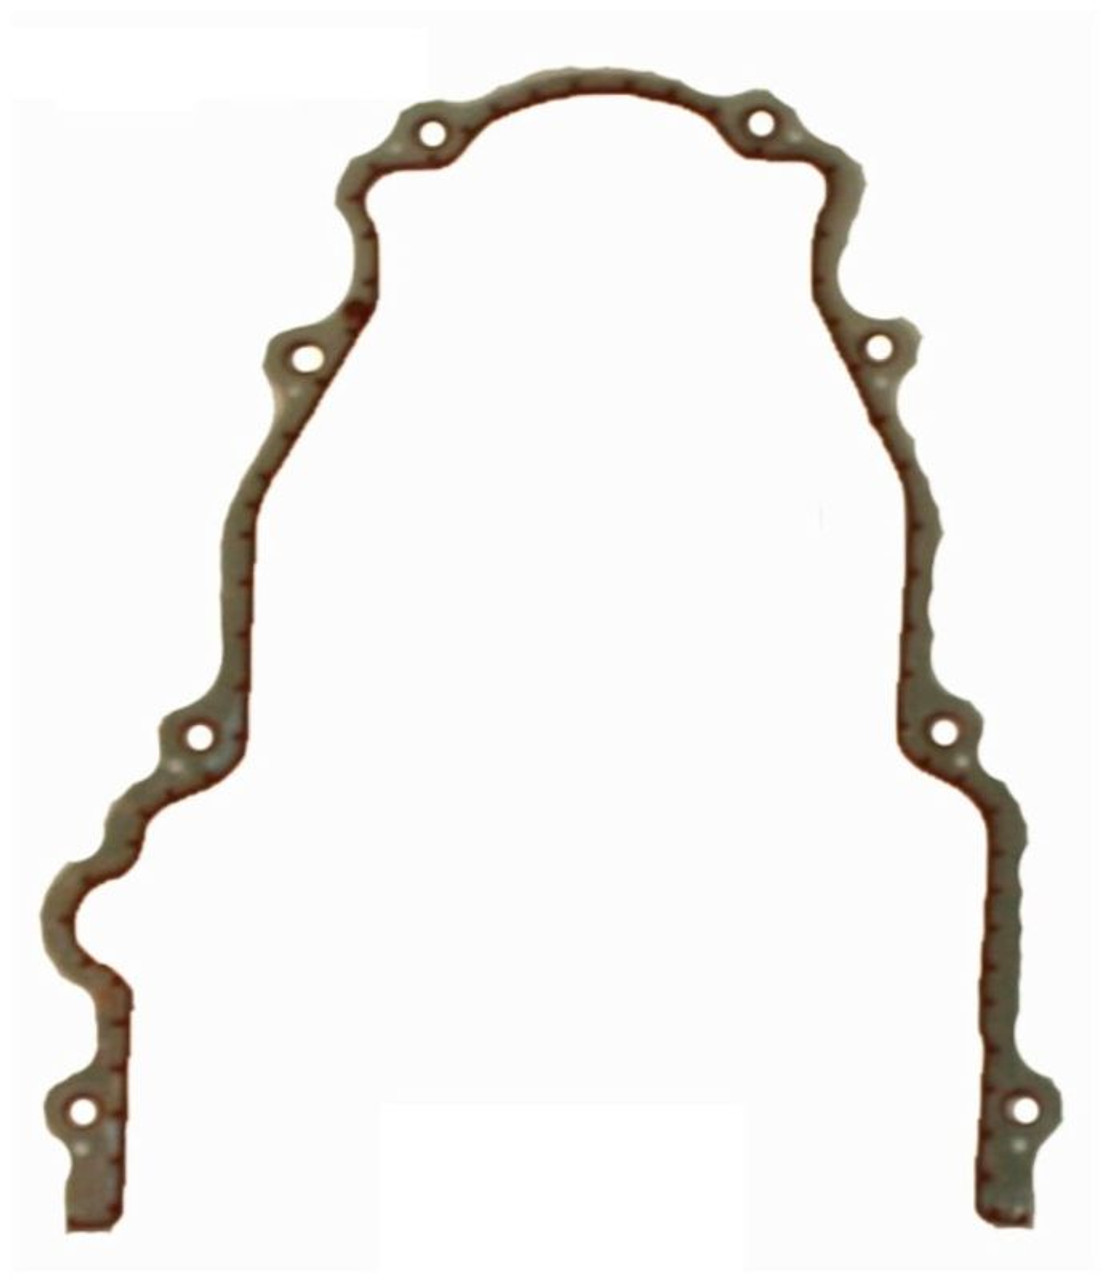 2010 Chevrolet Express 4500 6.0L Engine Timing Cover Gasket TCG293-A -646